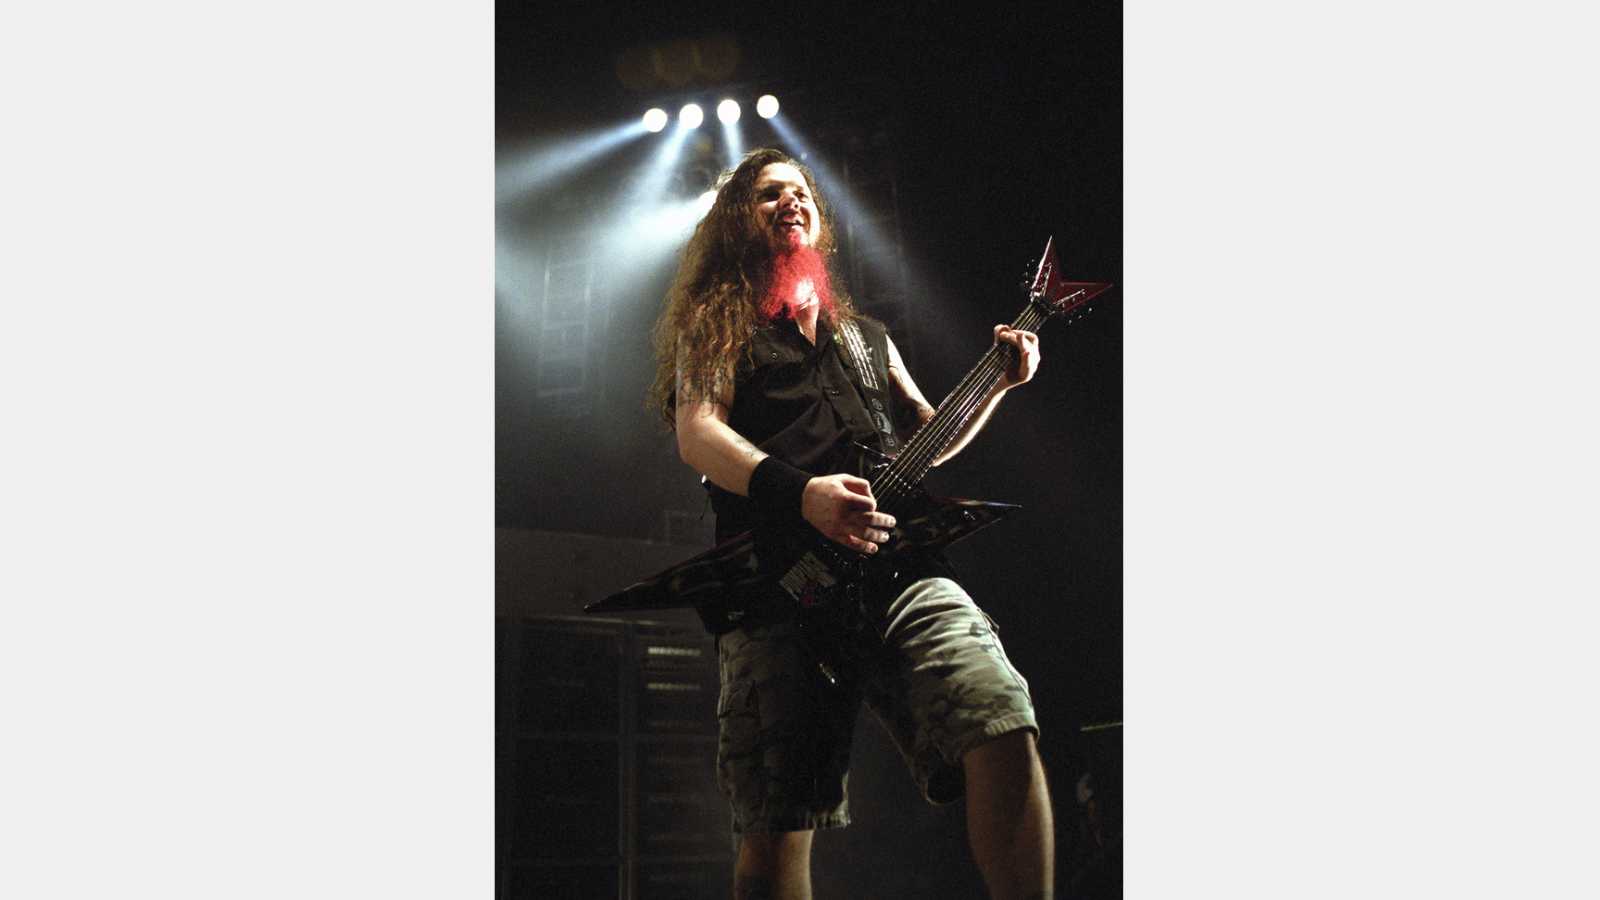 DENVER - FEBRUARY 13: Darrell Dimebag Abbott guitarist for the Heavy Metal band Pantera performs live in concert February 13, 2001 at the Coliseum in Denver, CO.
